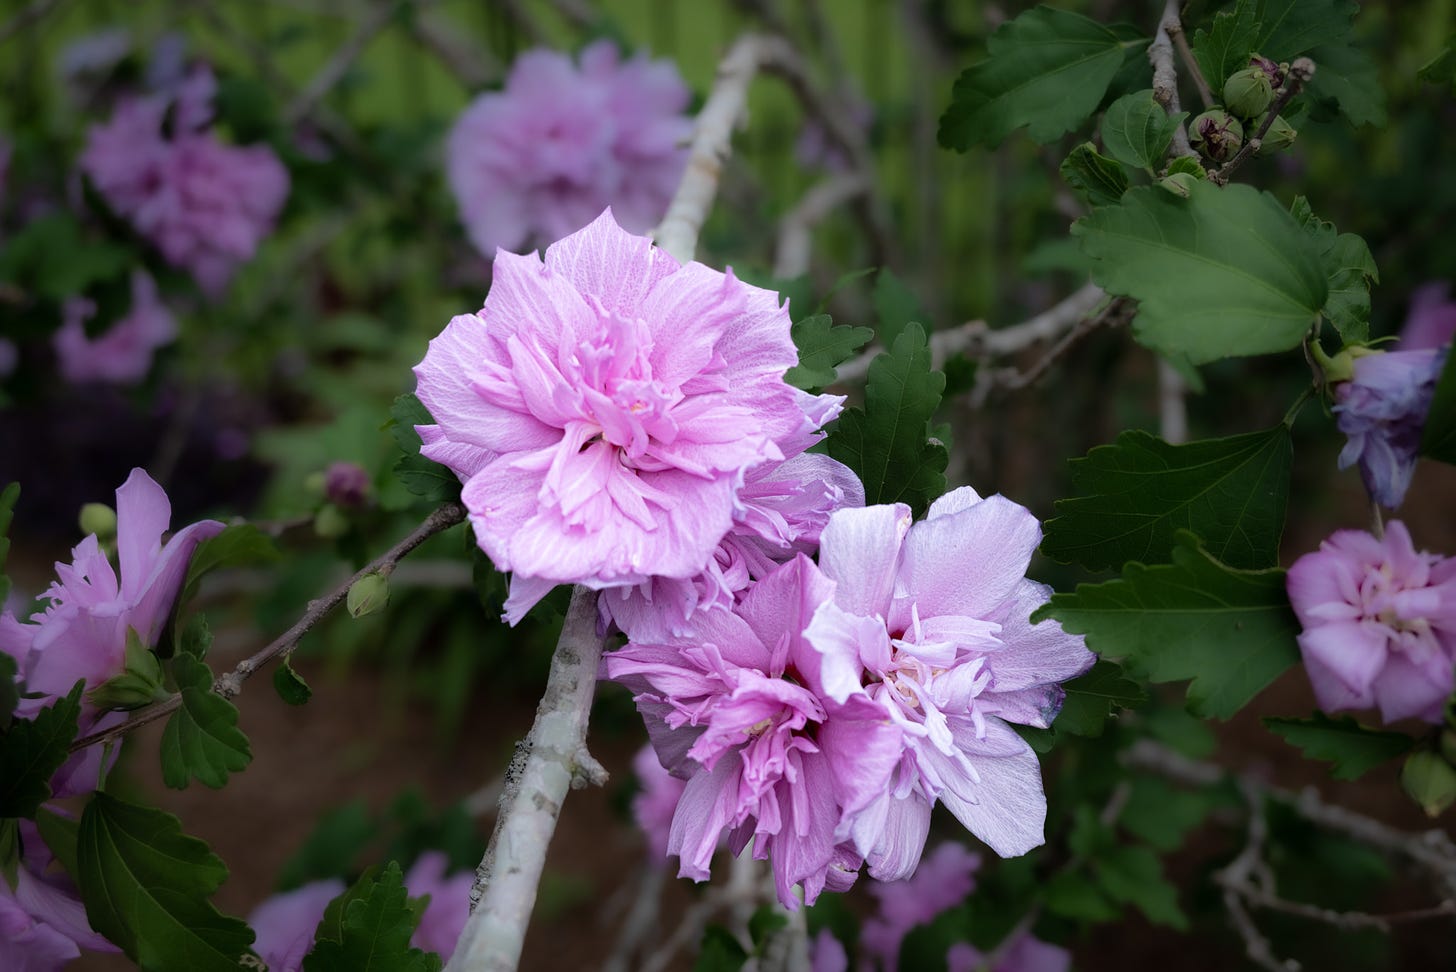 A cluster of lilac colored althea blooms on a branch with more in the background